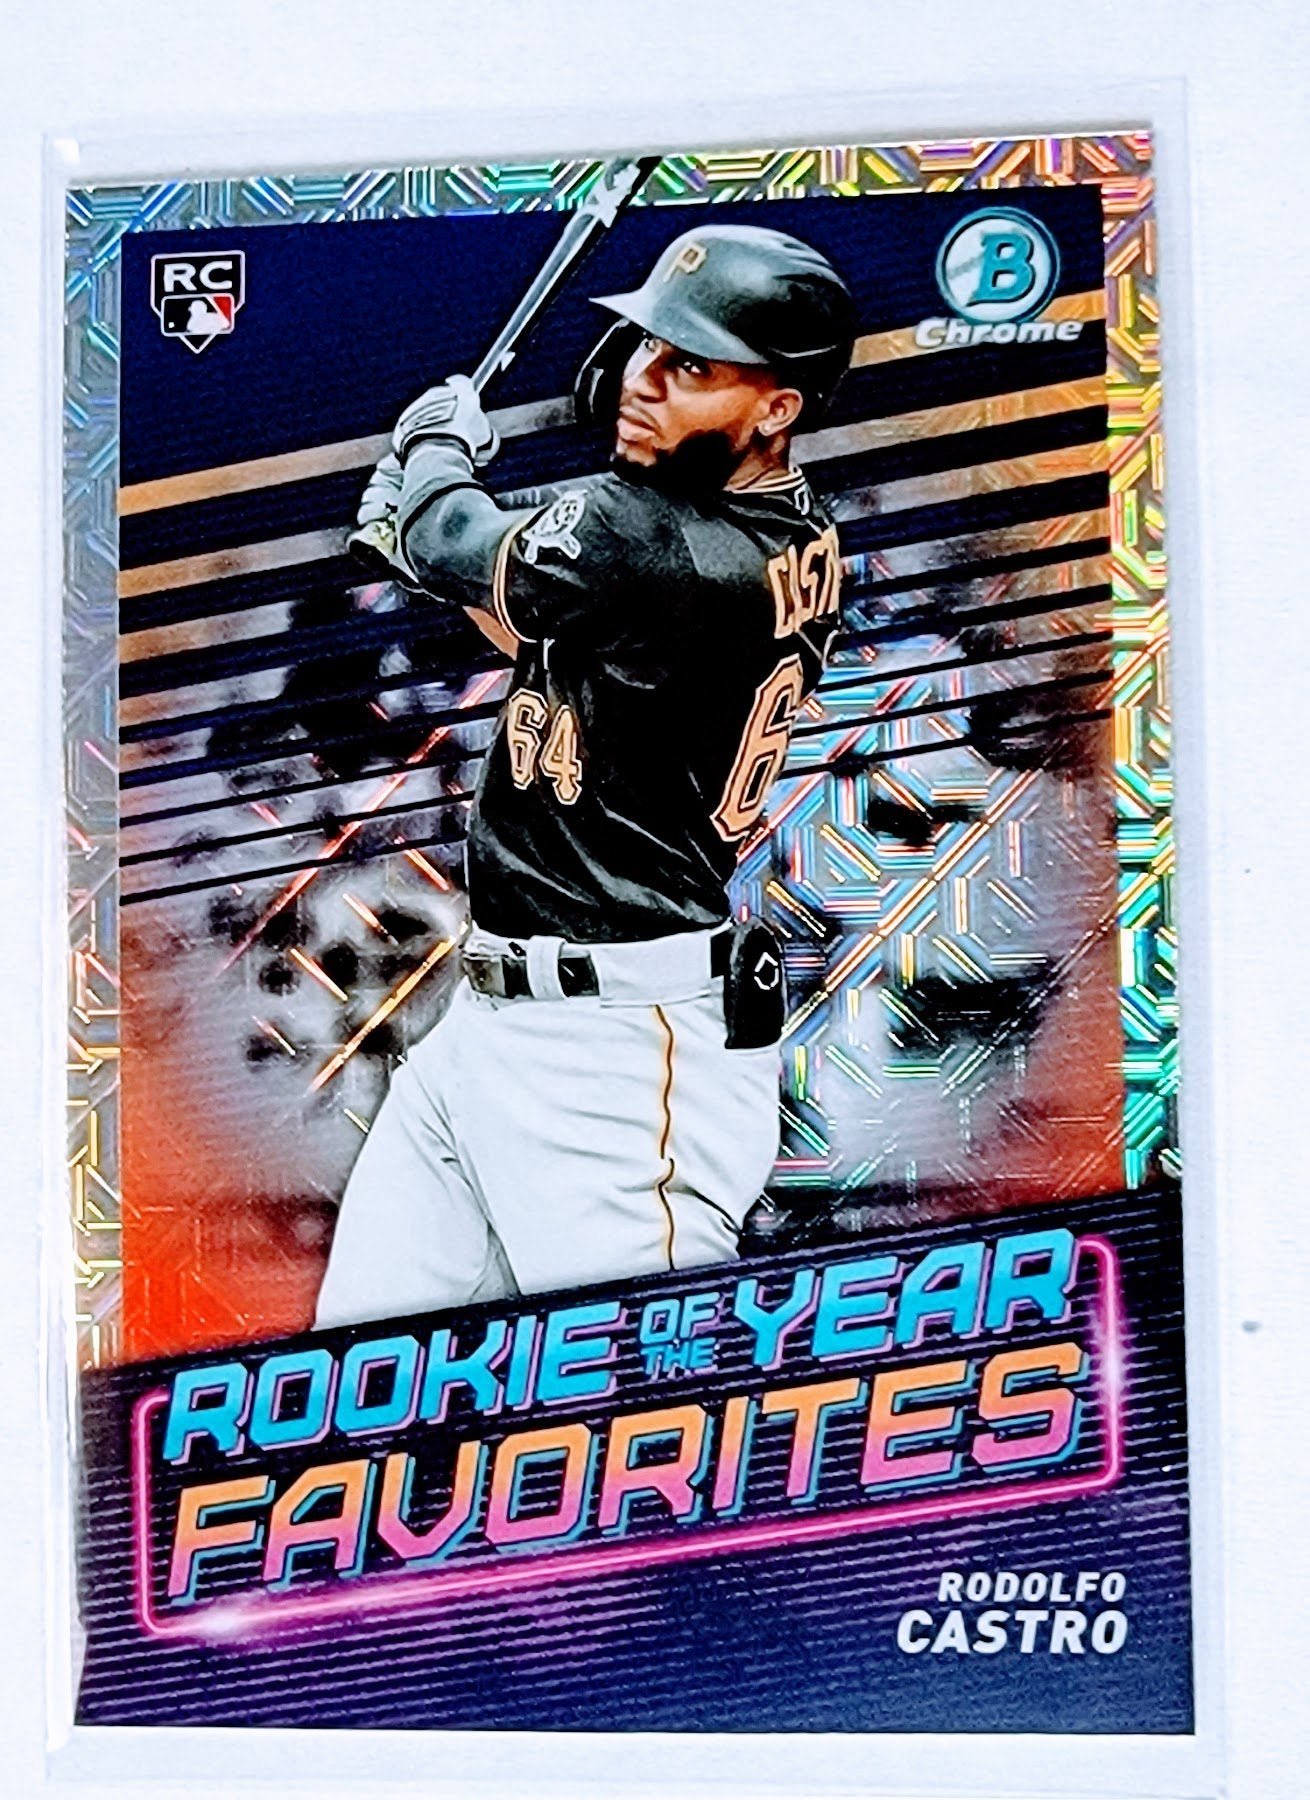 2022 Bowman Chrome Rodolfo Castro Rookie of the Year Favorites Mojo Rookie Refractor Baseball Trading Card SMCB1 simple Xclusive Collectibles   